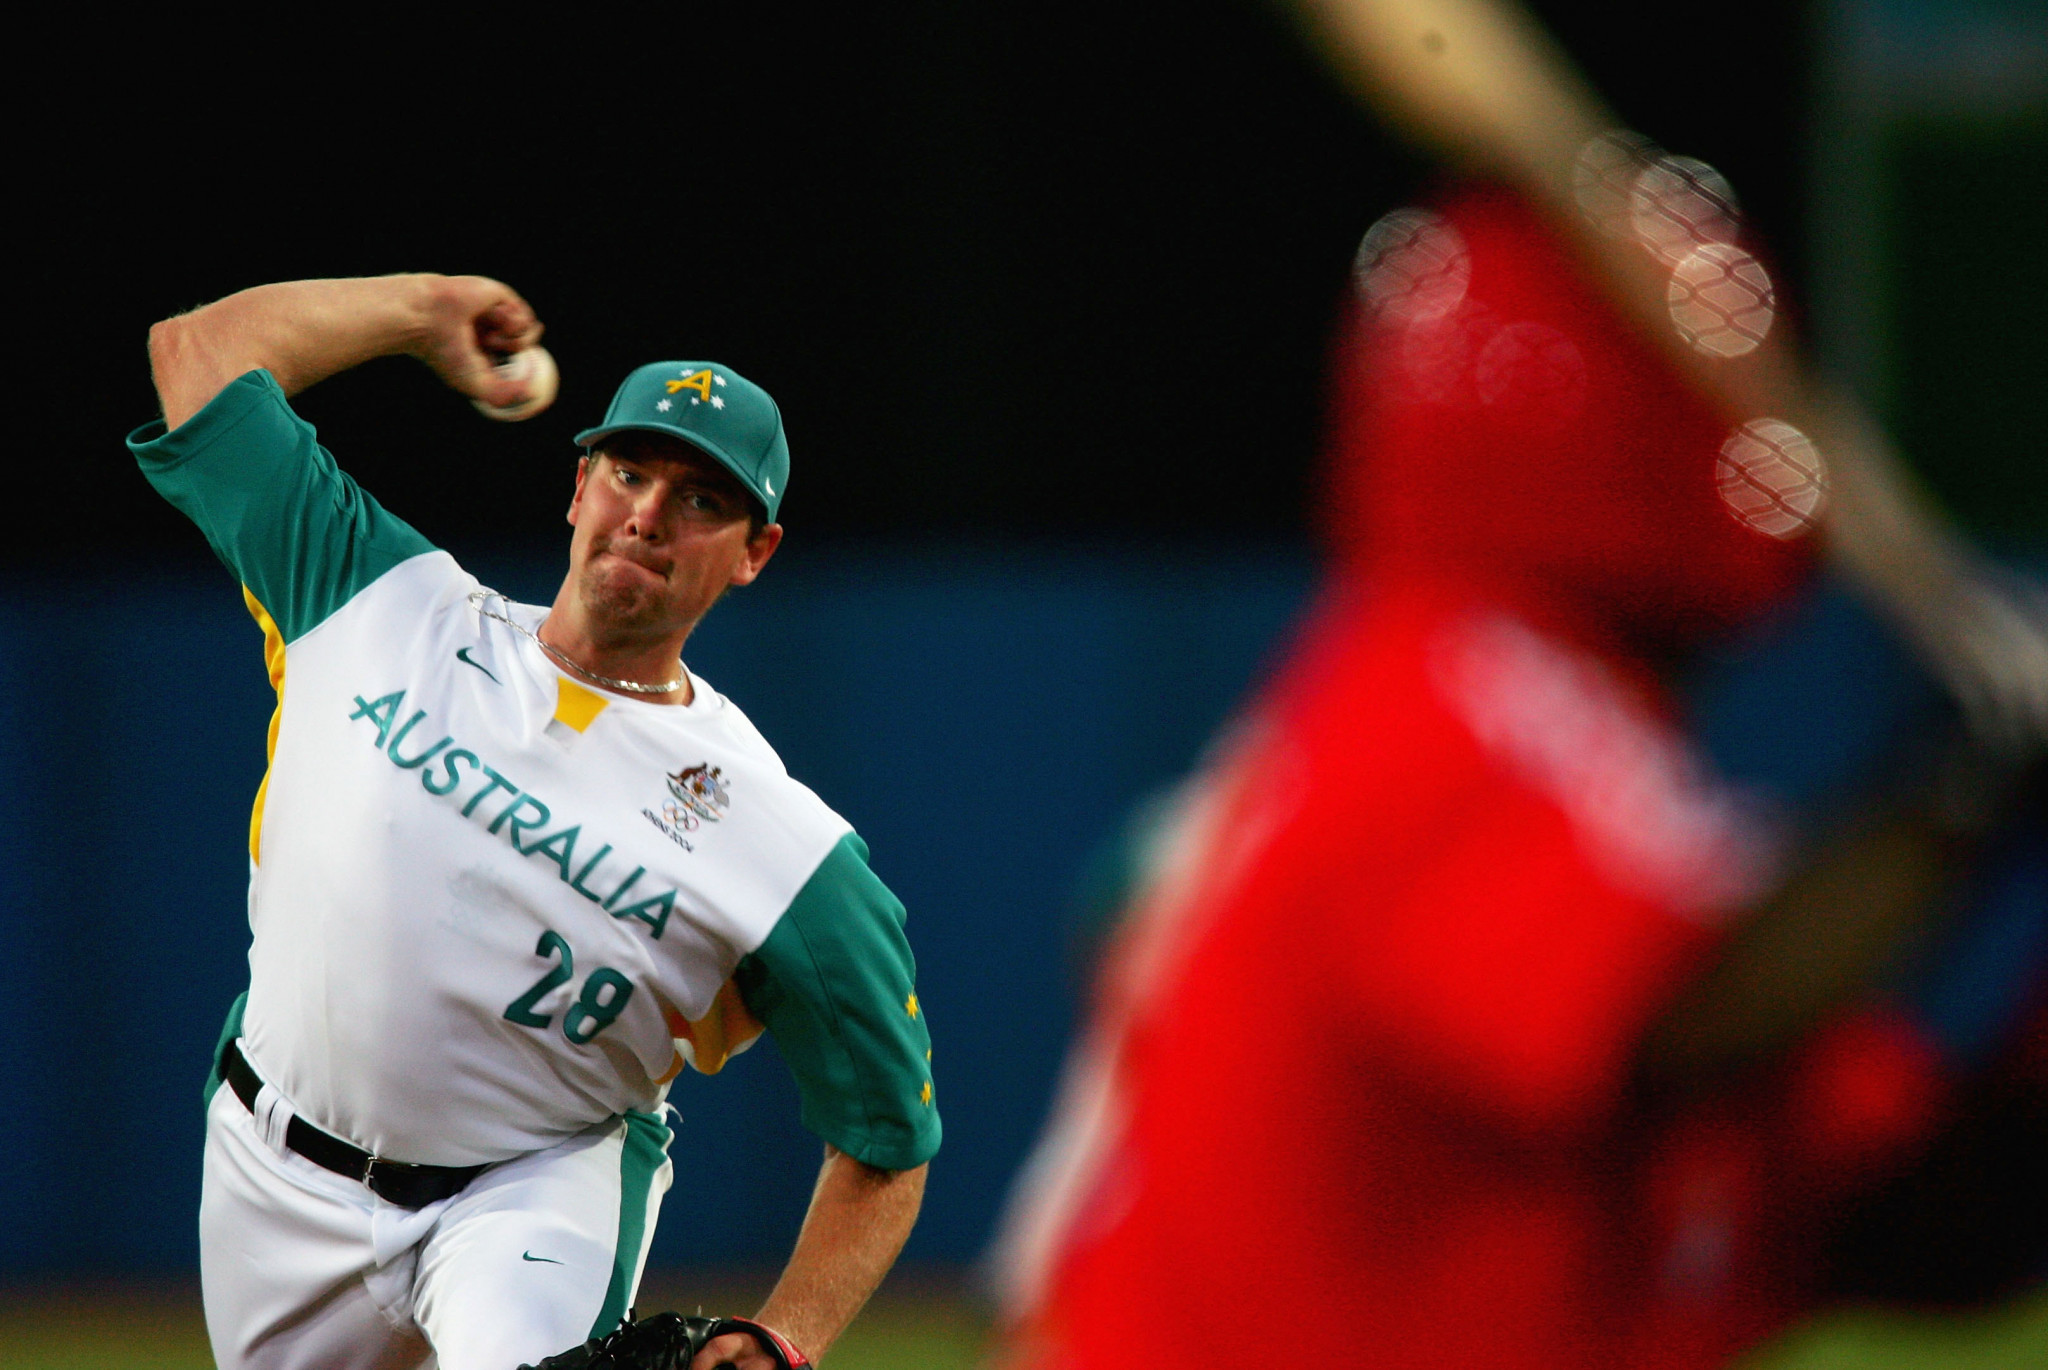 Baseball Australia launches five-year plan to boost participation